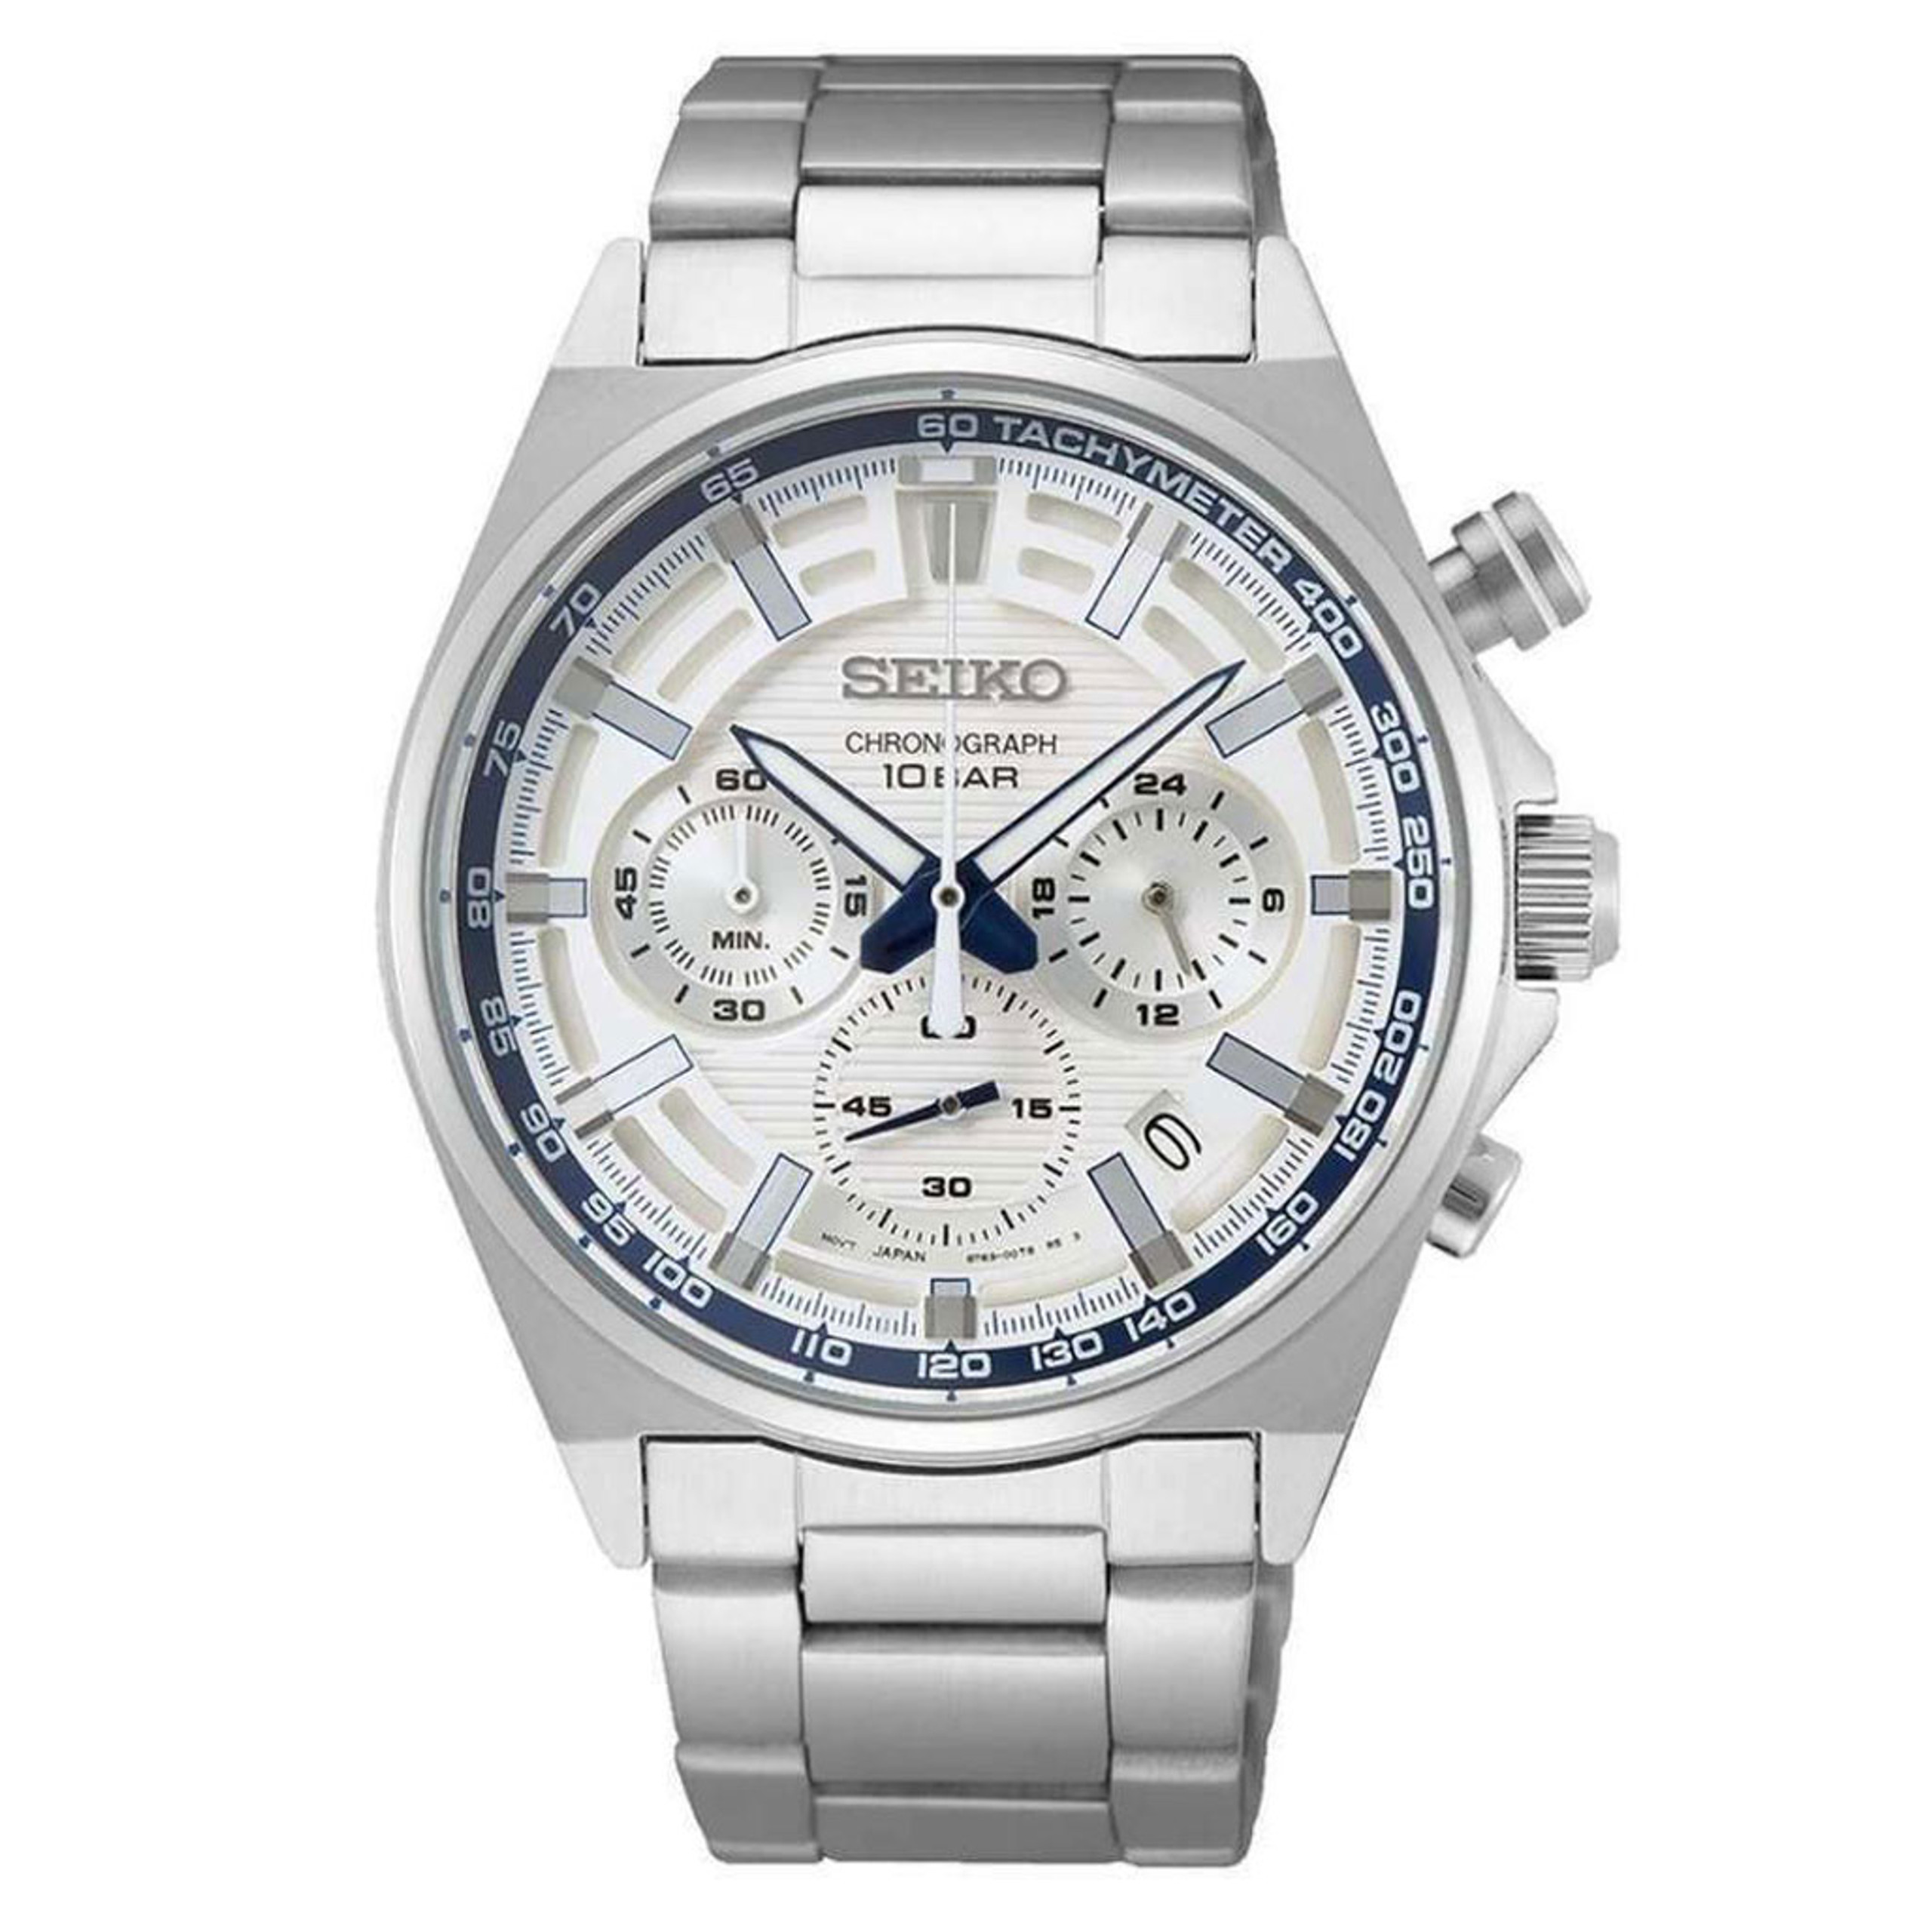 Seiko Quartz Chronograph with 60-minute timer, stop-watch style pusher ...